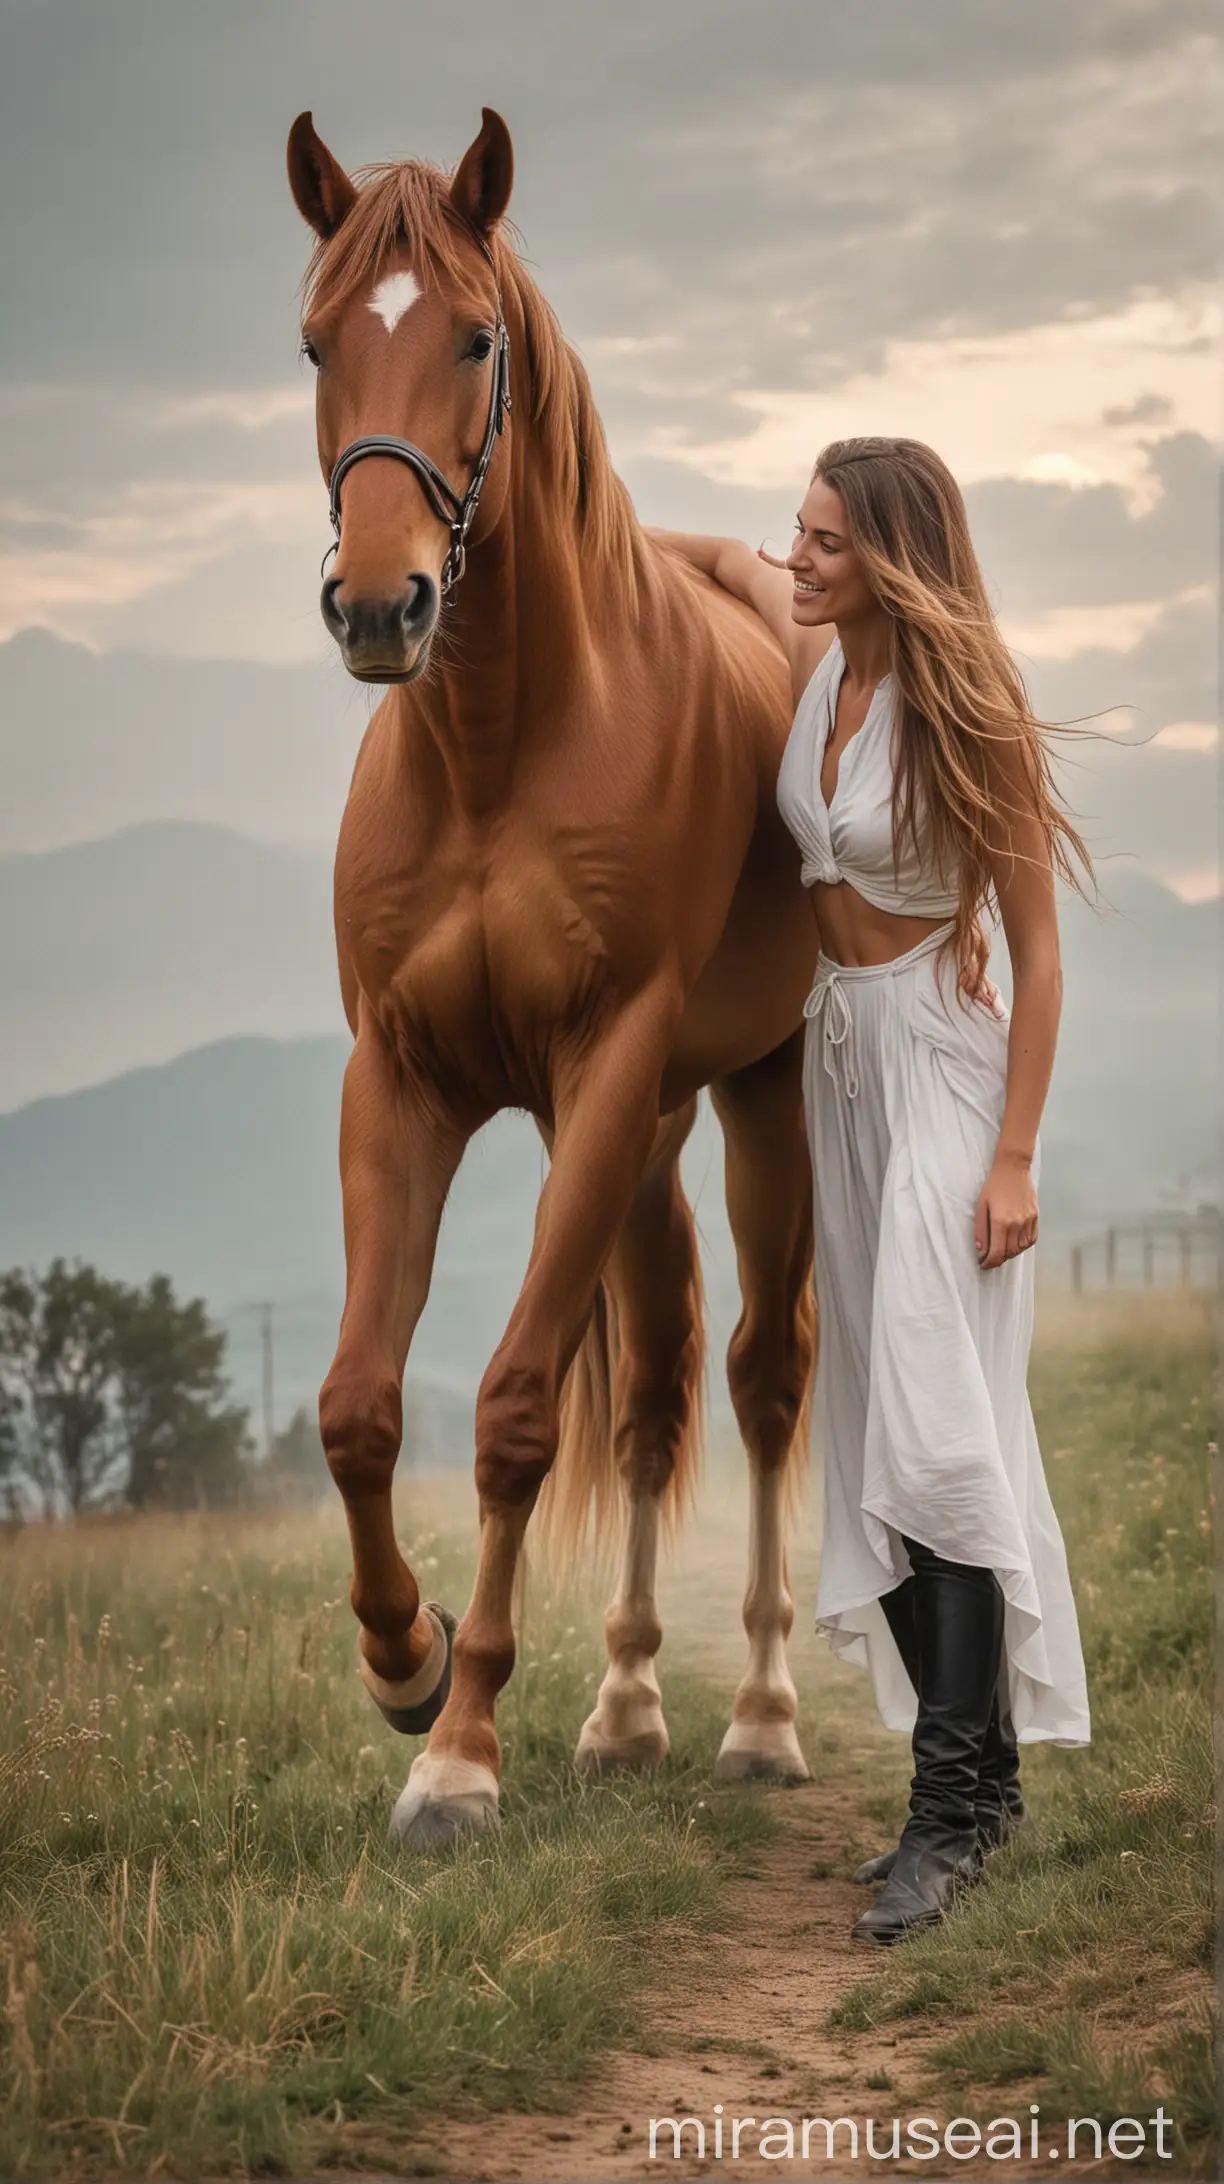 Woman Riding Majestic Horse in Countryside Landscape